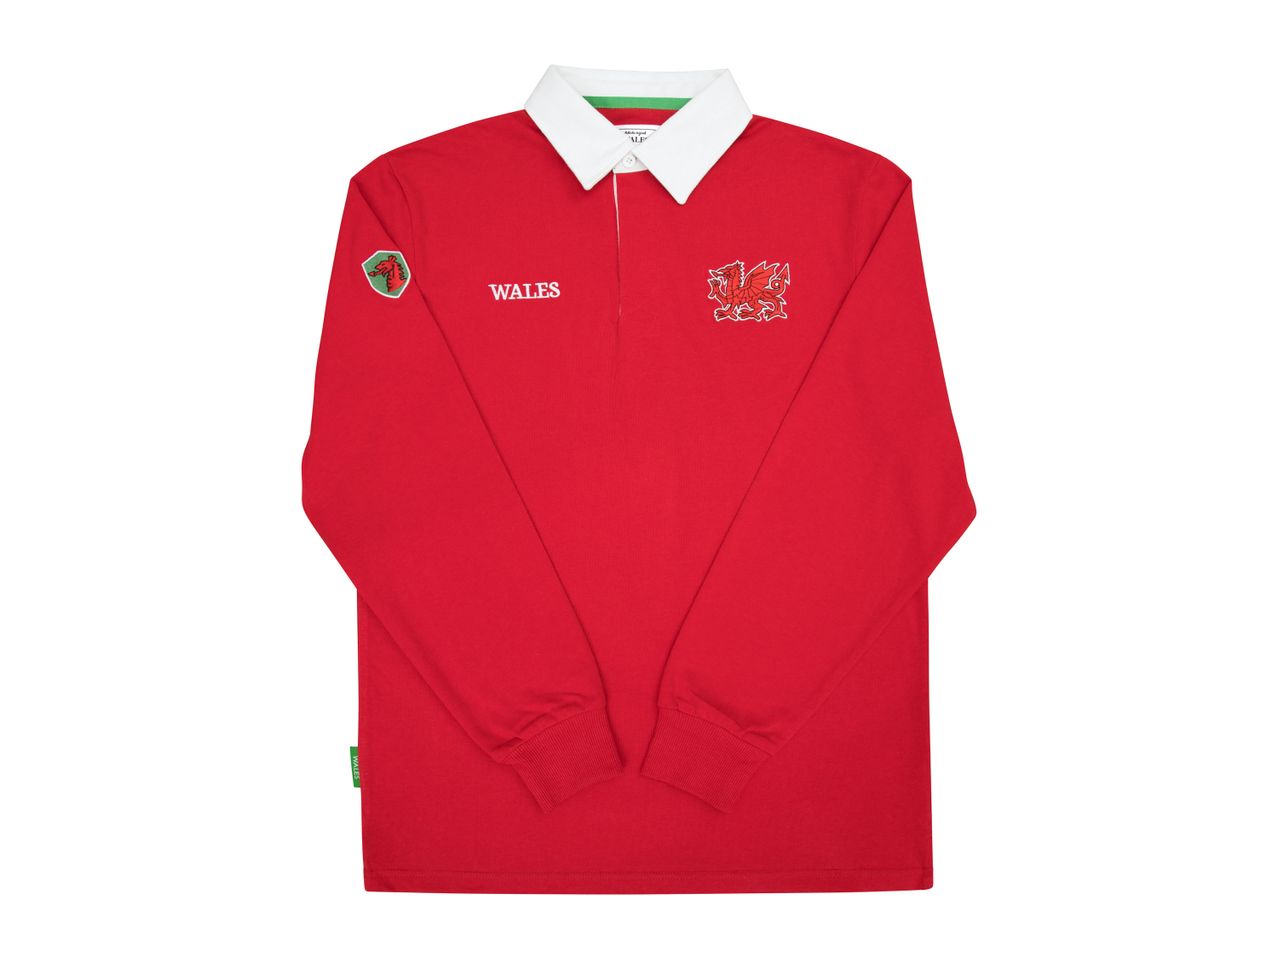 Go to full screen view: Adults’ Wales Rugby Shirt - Image 2